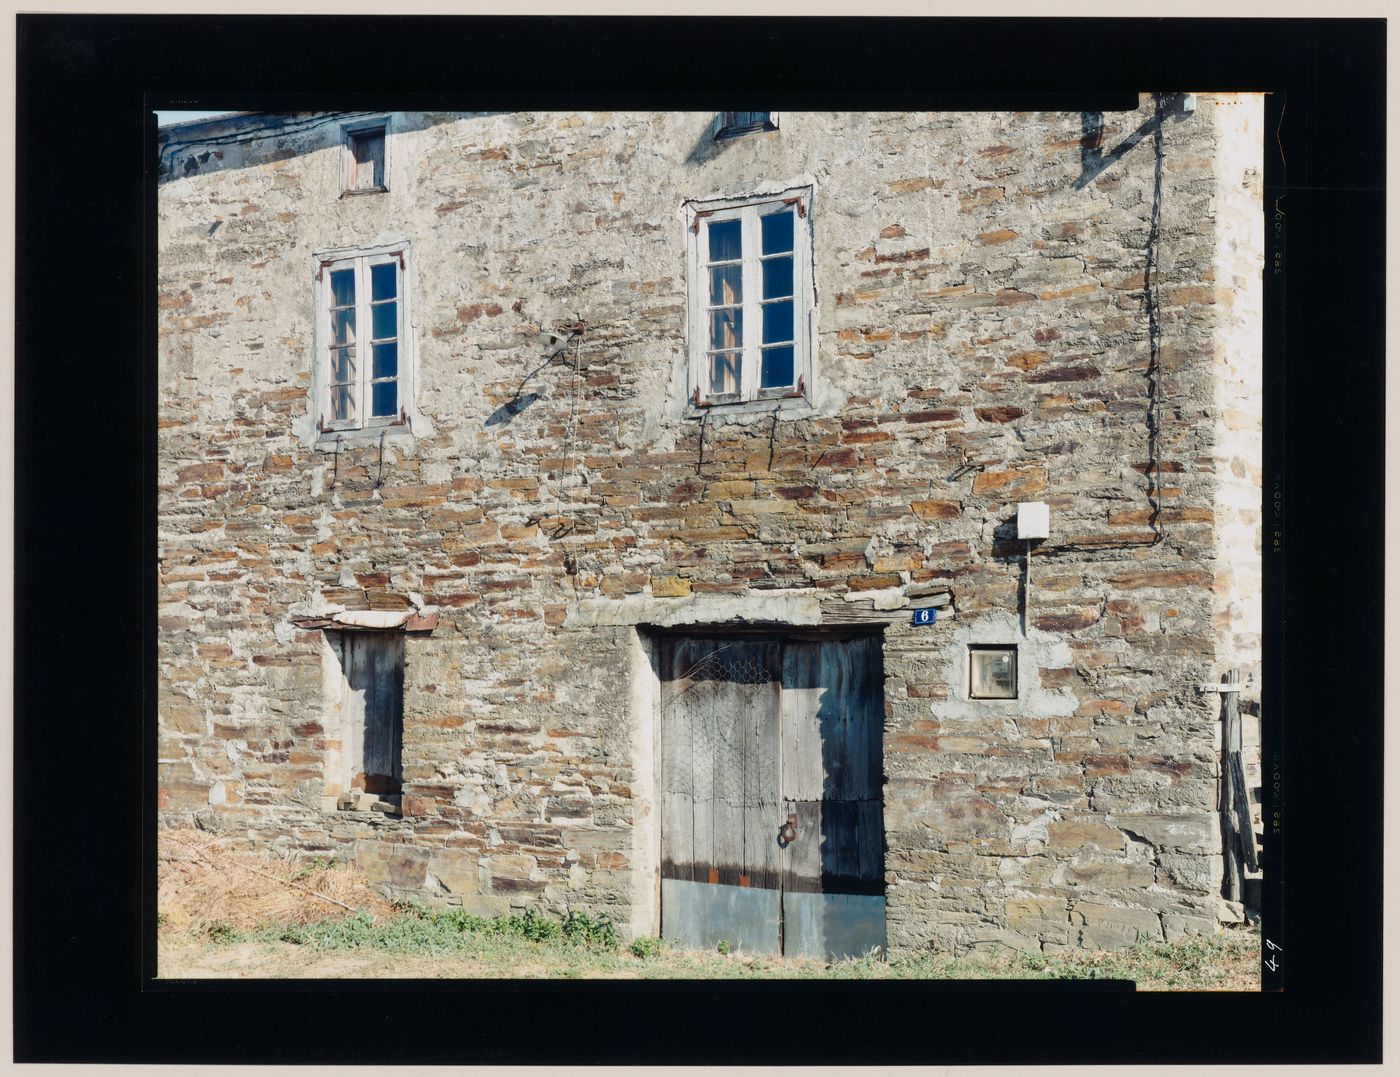 View of a stone house showing a door and windows, probably Castrotierra de Valmadrigal, León Province, Spain (from the series "In between cities")